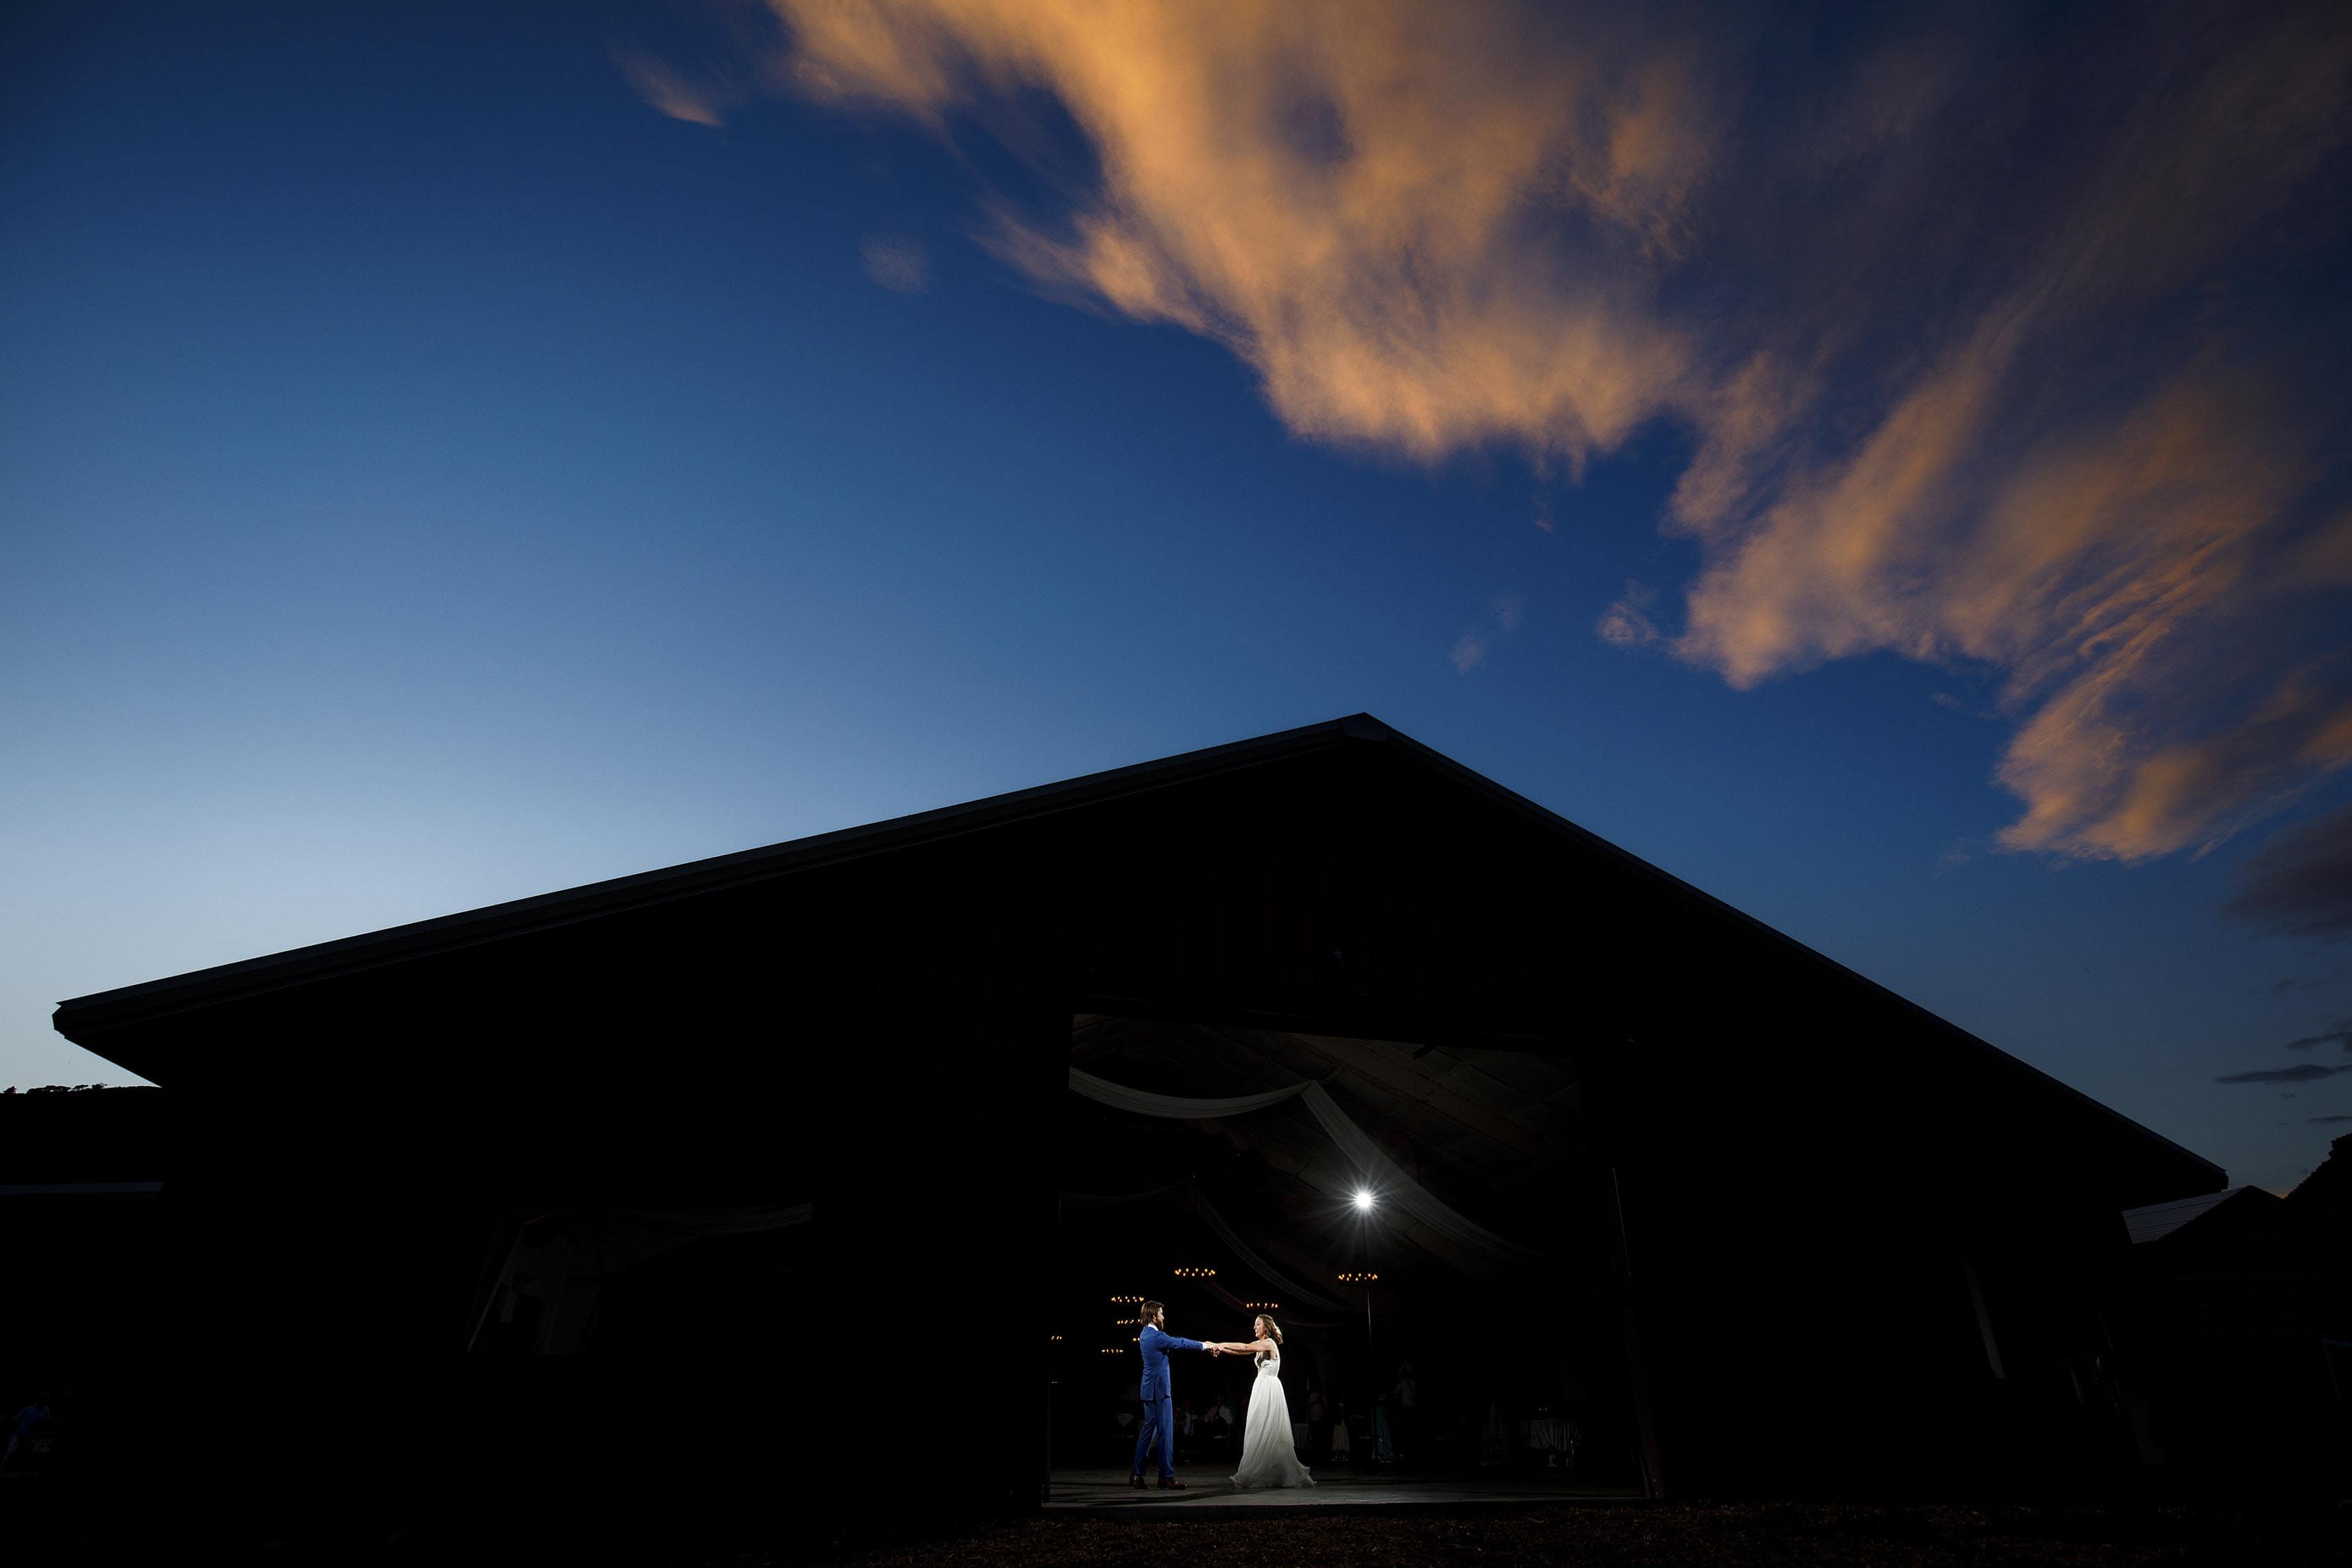 Laura and Ryan dance together in the barn as the sunset illuminates clouds during their 4 Eagle Ranch wedding in Wolcott, CO